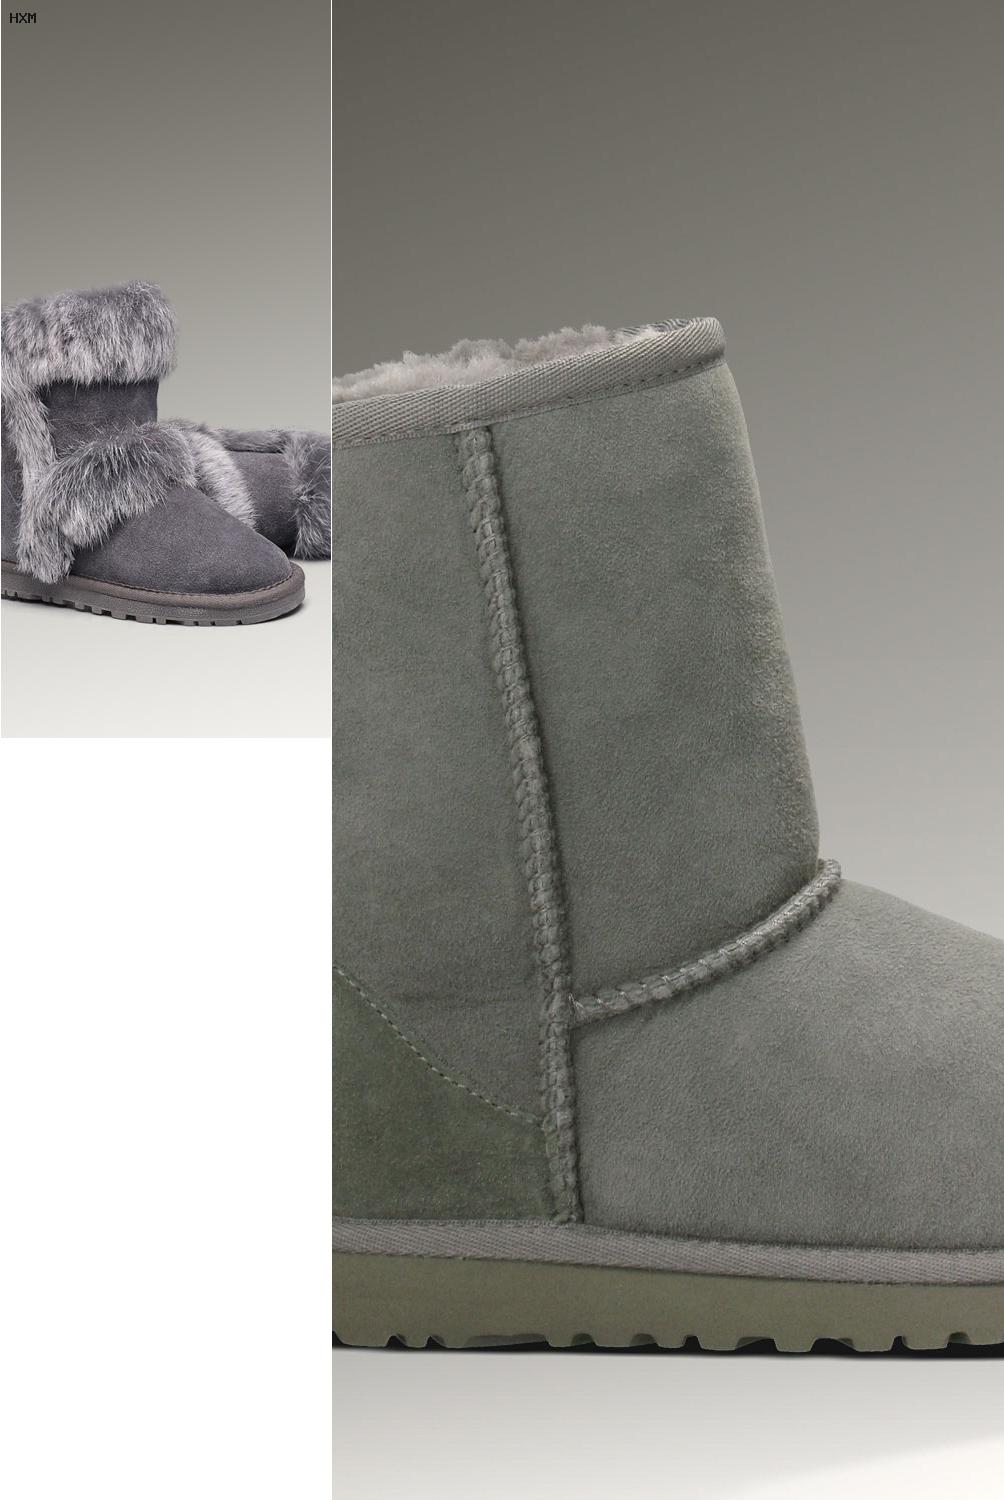 ugg boots made in australia